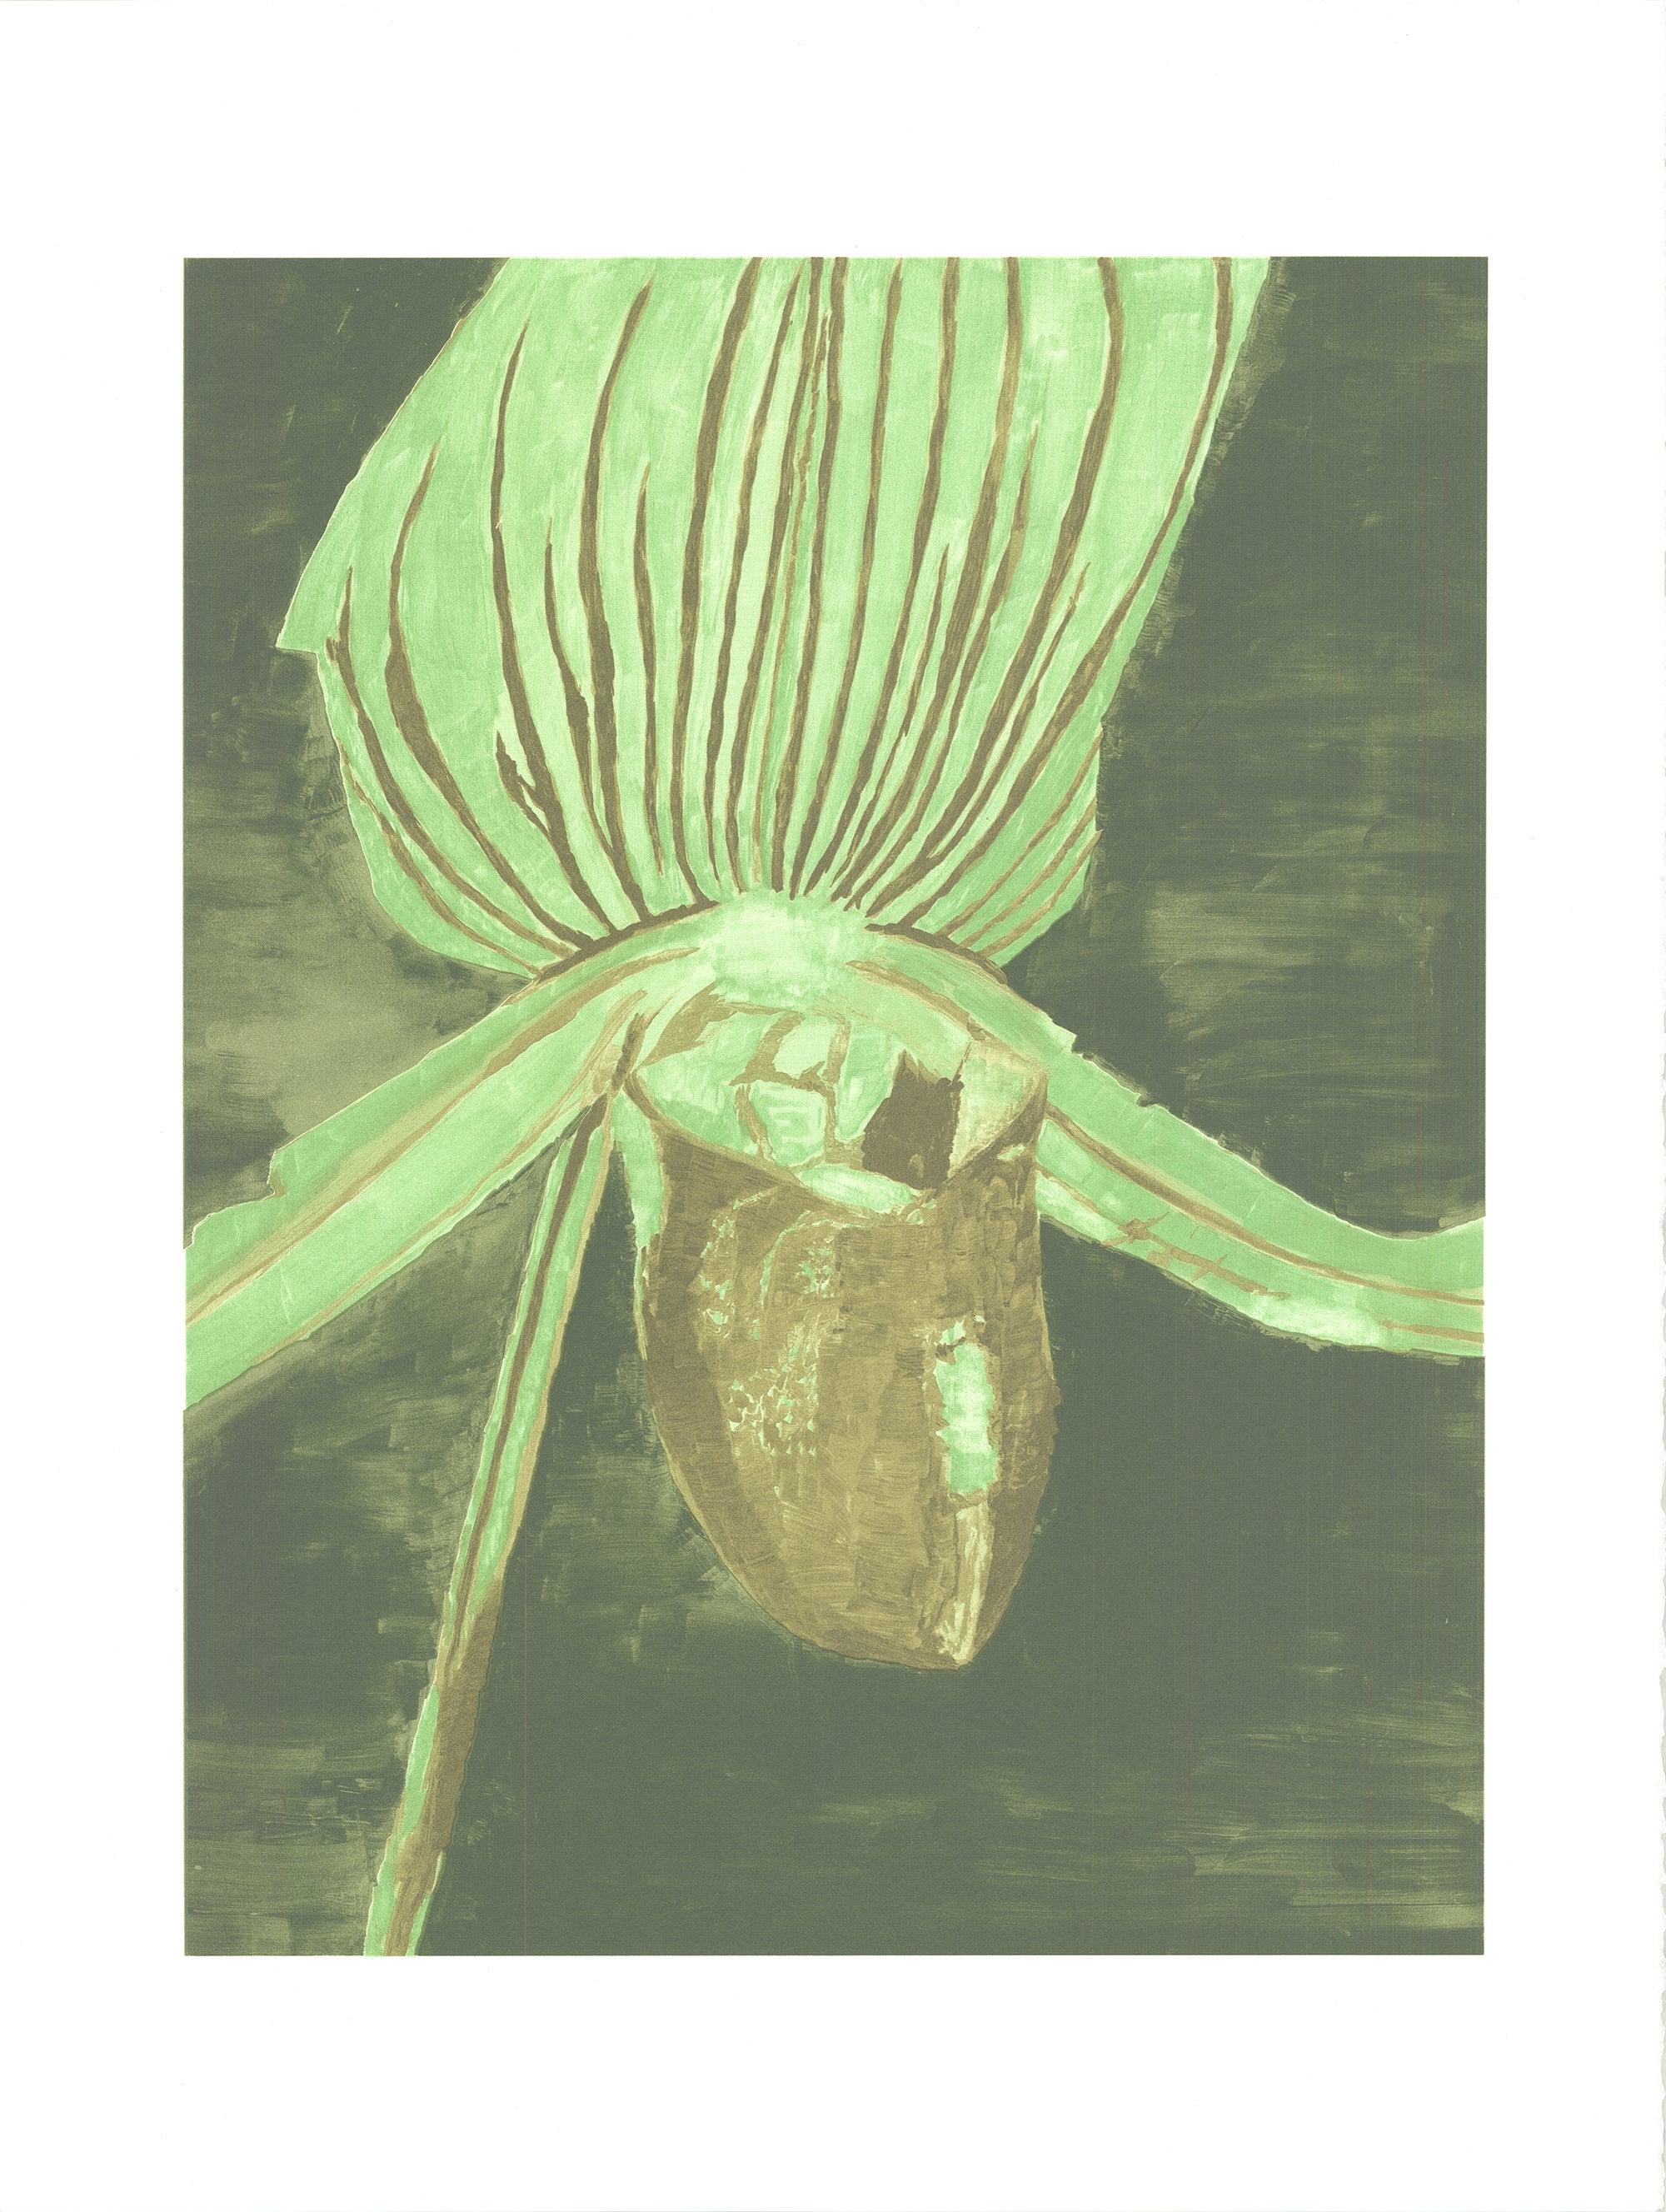 LUC TUYMANS Orchid, 2013 UNSIGNED - Print by Luc Tuymans